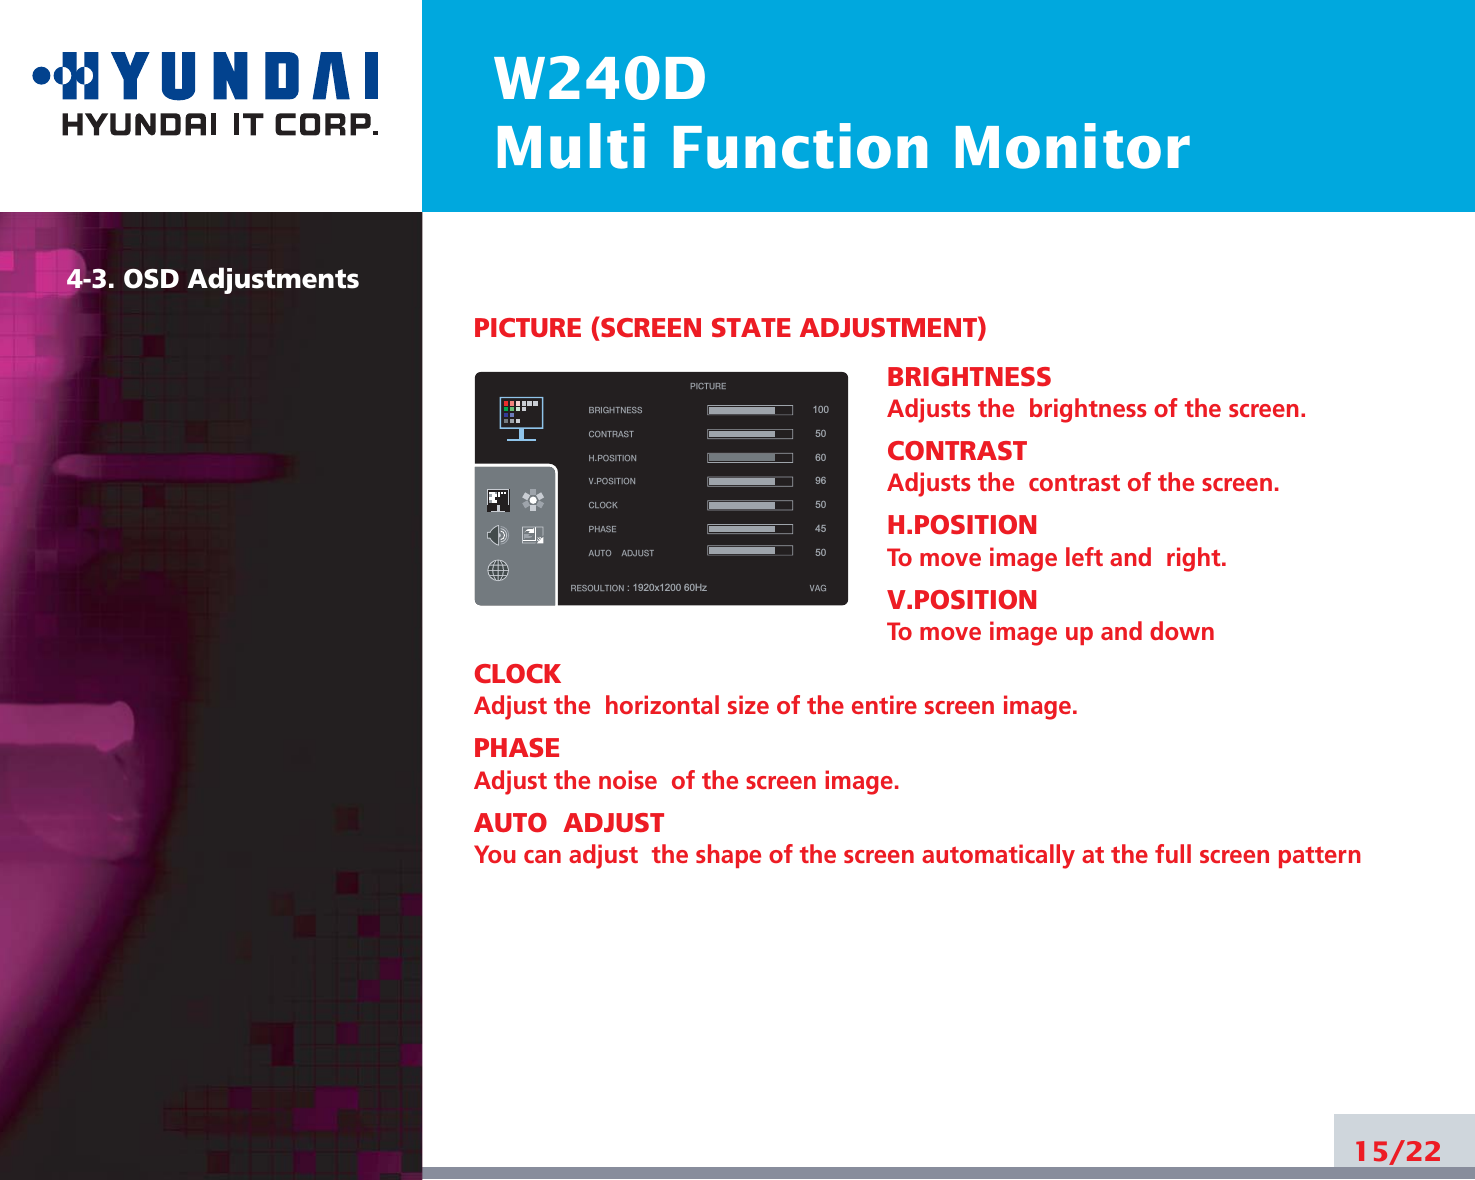 W240DMulti Function Monitor15/224-3. OSD AdjustmentsPICTURE (SCREEN STATE ADJUSTMENT)BRIGHTNESSAdjusts the  brightness of the screen.CONTRASTAdjusts the  contrast of the screen.H.POSITIONTo move image left and  right.V.POSITIONTo move image up and downCLOCKAdjust the  horizontal size of the entire screen image.PHASEAdjust the noise  of the screen image.AUTO  ADJUSTYou can adjust  the shape of the screen automatically at the full screen patternBRIGHTNESSCONTRAST H.POSITIONV.POSITIONCLOCKPHASEAUTOADJUSTRESOULTION : 1920x1200 60Hz VAGPICTURE100506096504550